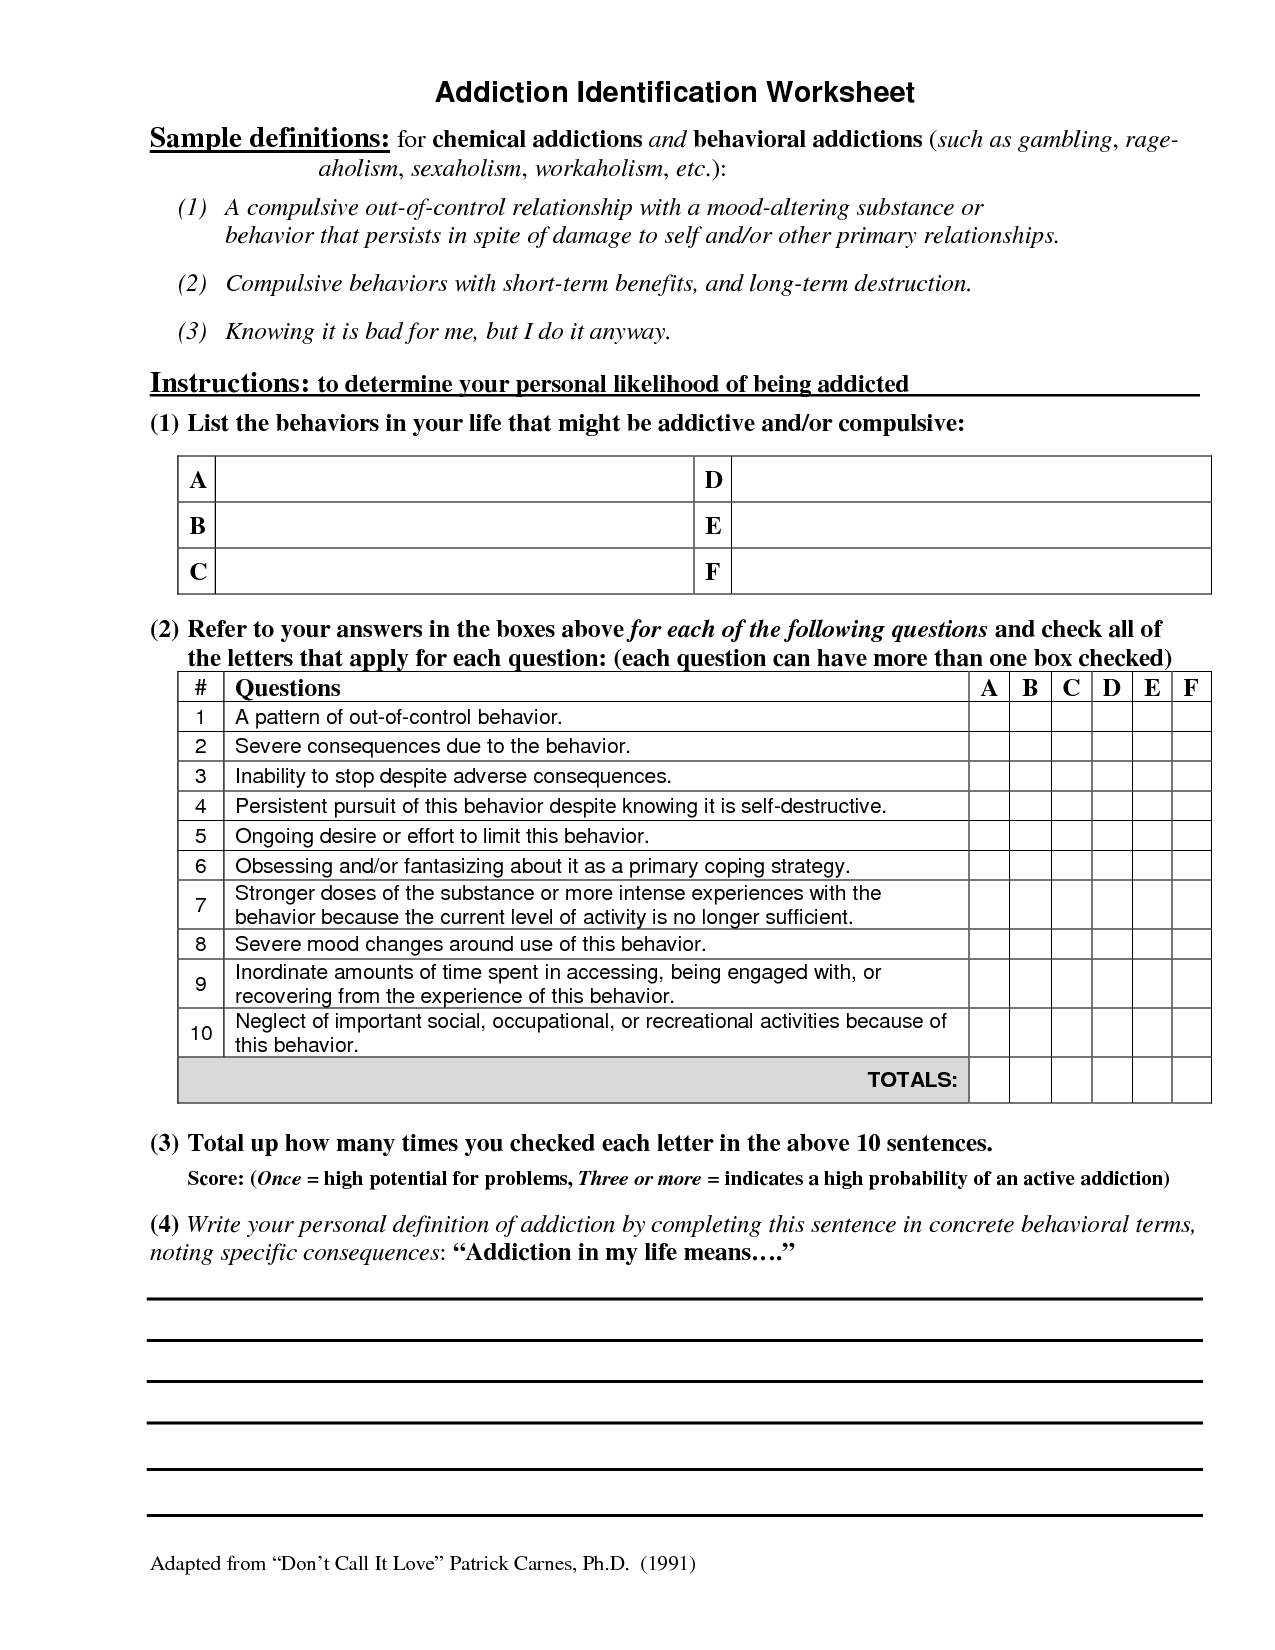 17-best-images-of-cross-addiction-worksheet-drug-addiction-recovery